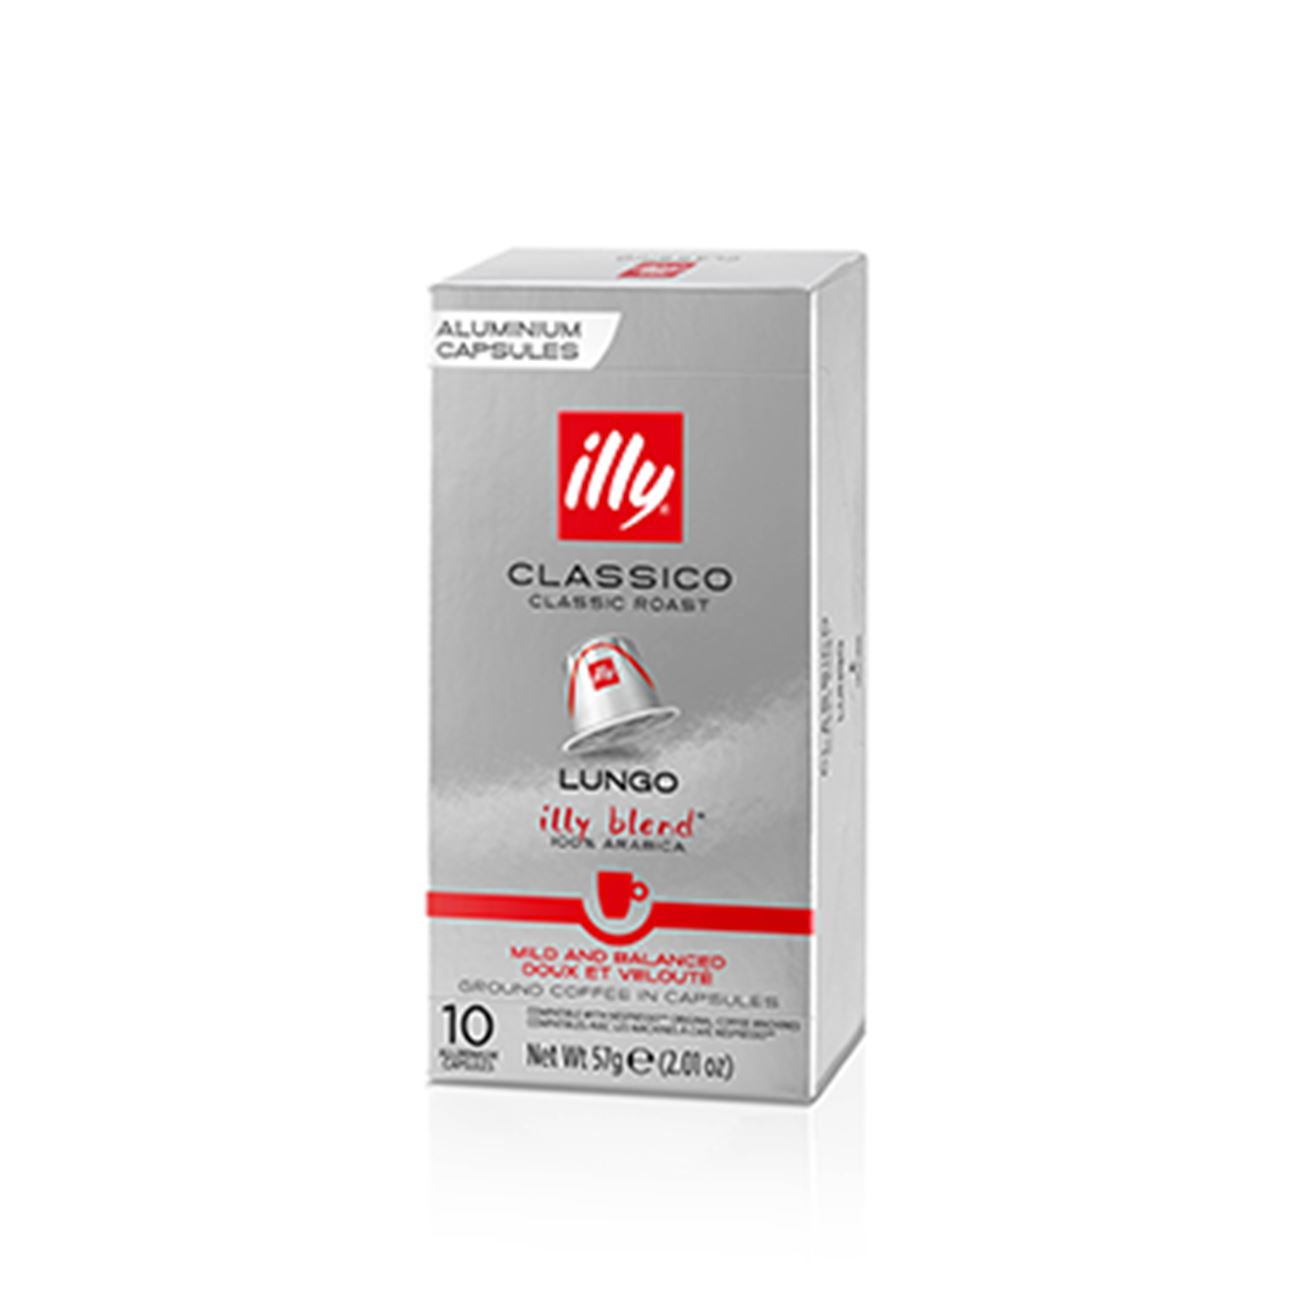 illy LUNGO 10 COMPATIBLE ΚΑΨΟΥΛΕΣ